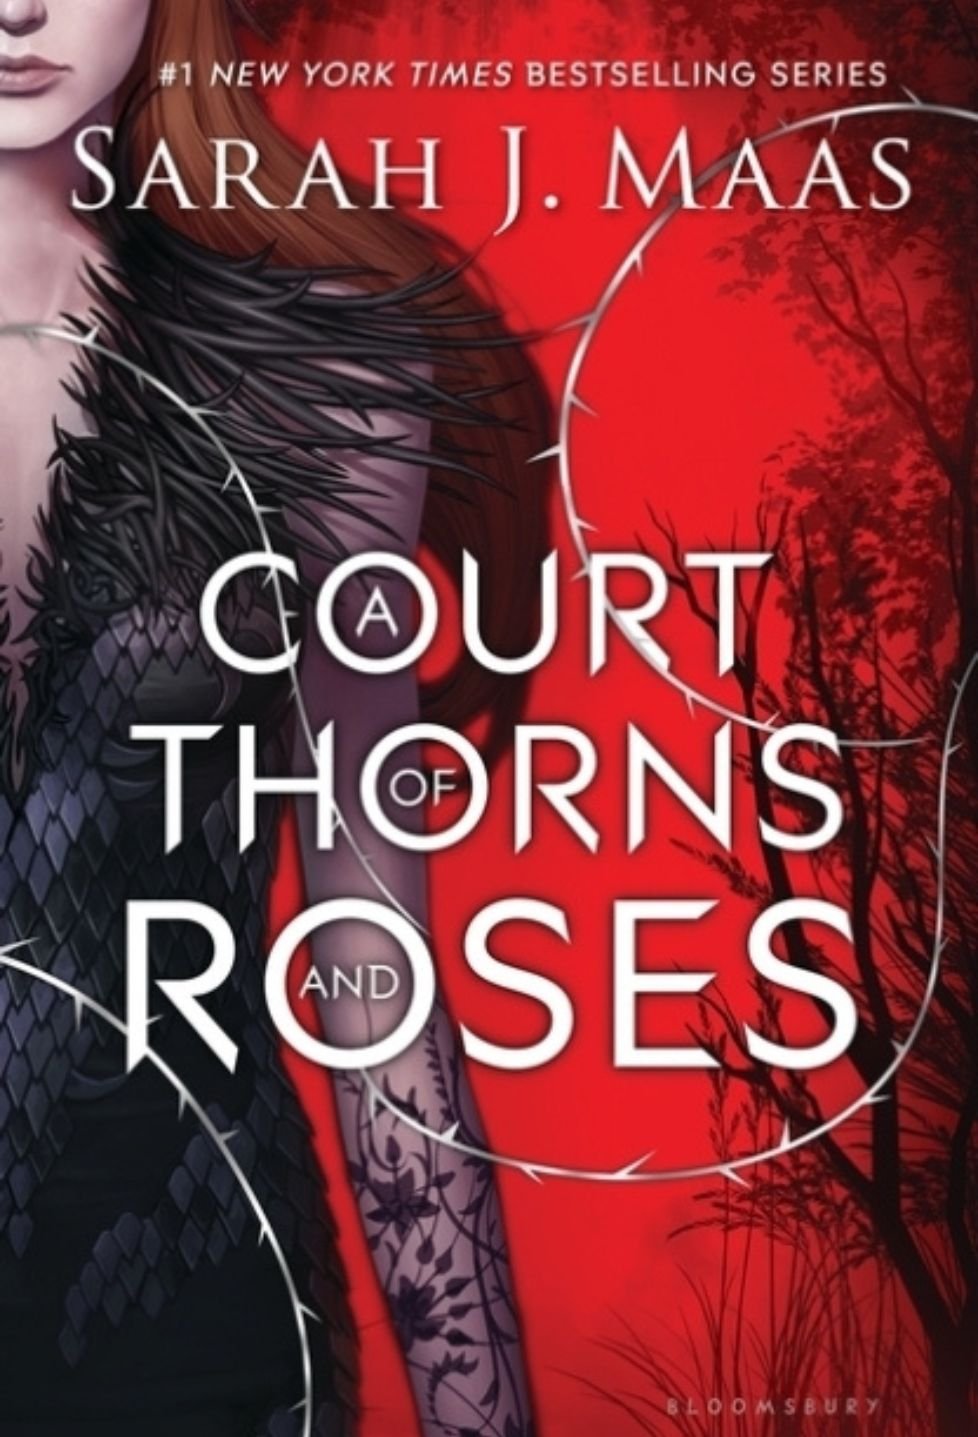 a court of thorns and roses pdf by Sarah j. maas